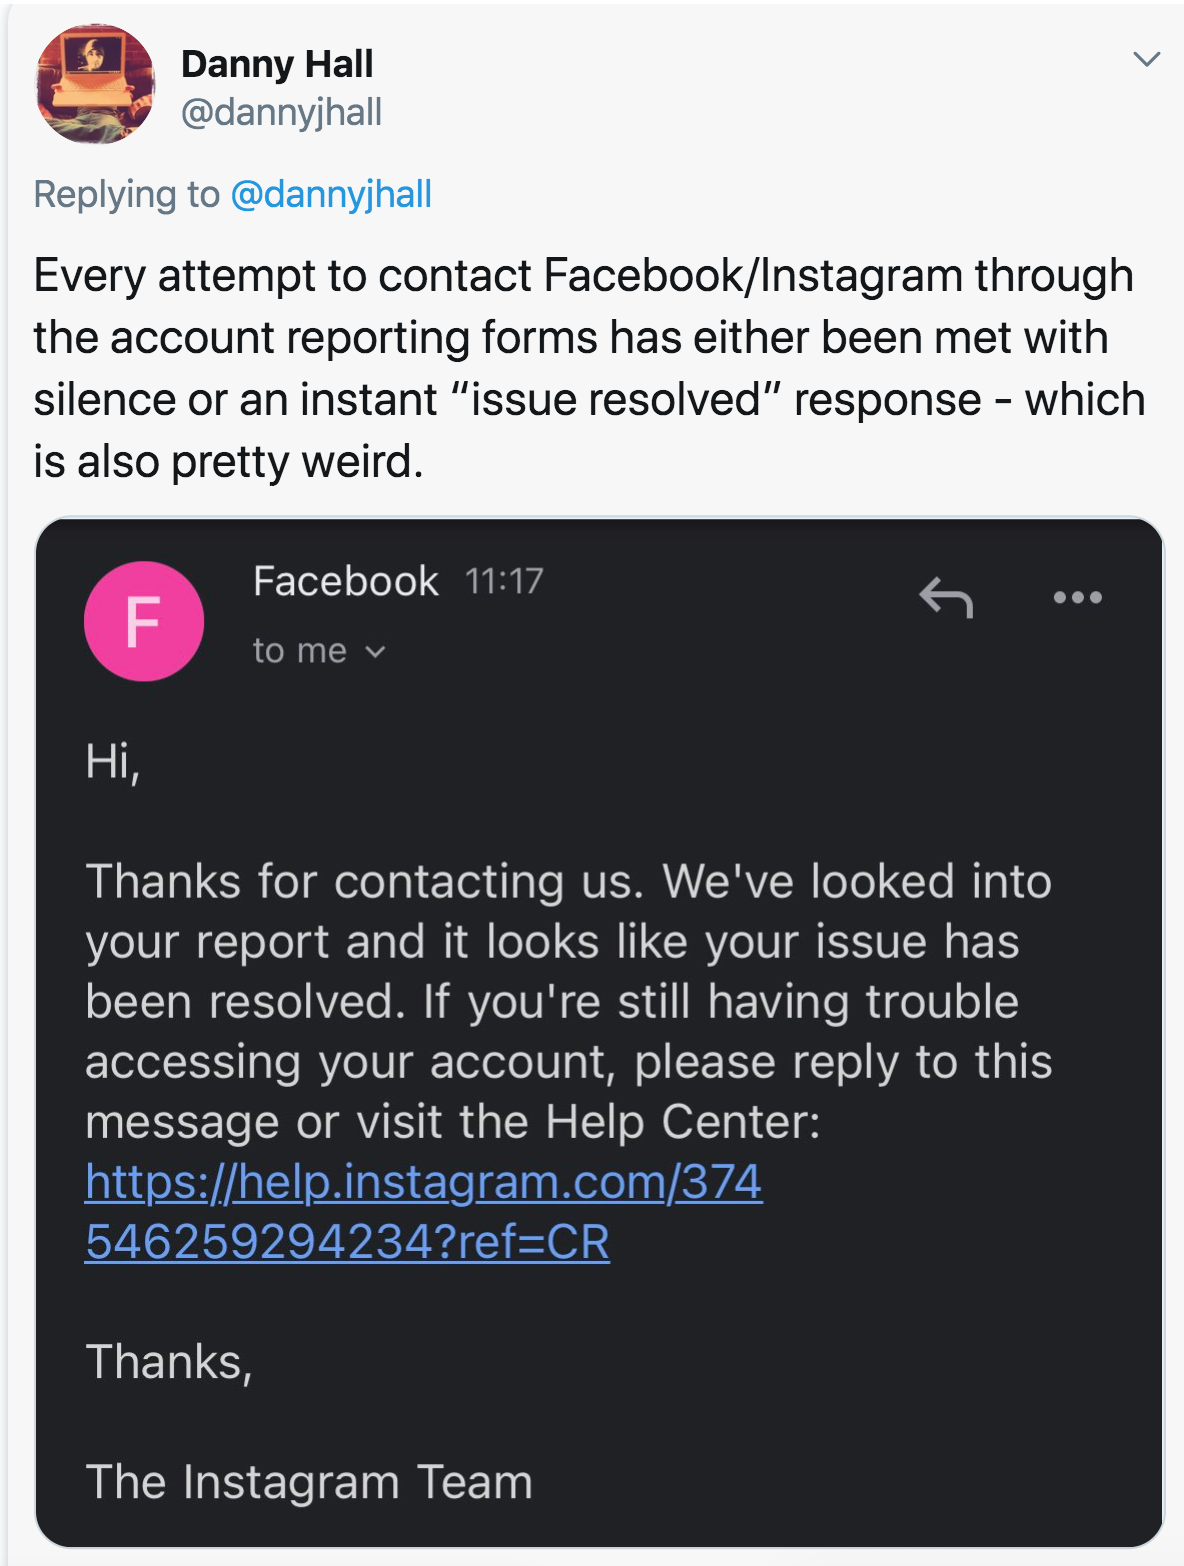 multimedia - Danny Hall Every attempt to contact FacebookInstagram through the account reporting forms has either been met with silence or an instant "issue resolved" response which is also pretty weird. F Facebook to me Hi, Thanks for contacting us. We'v